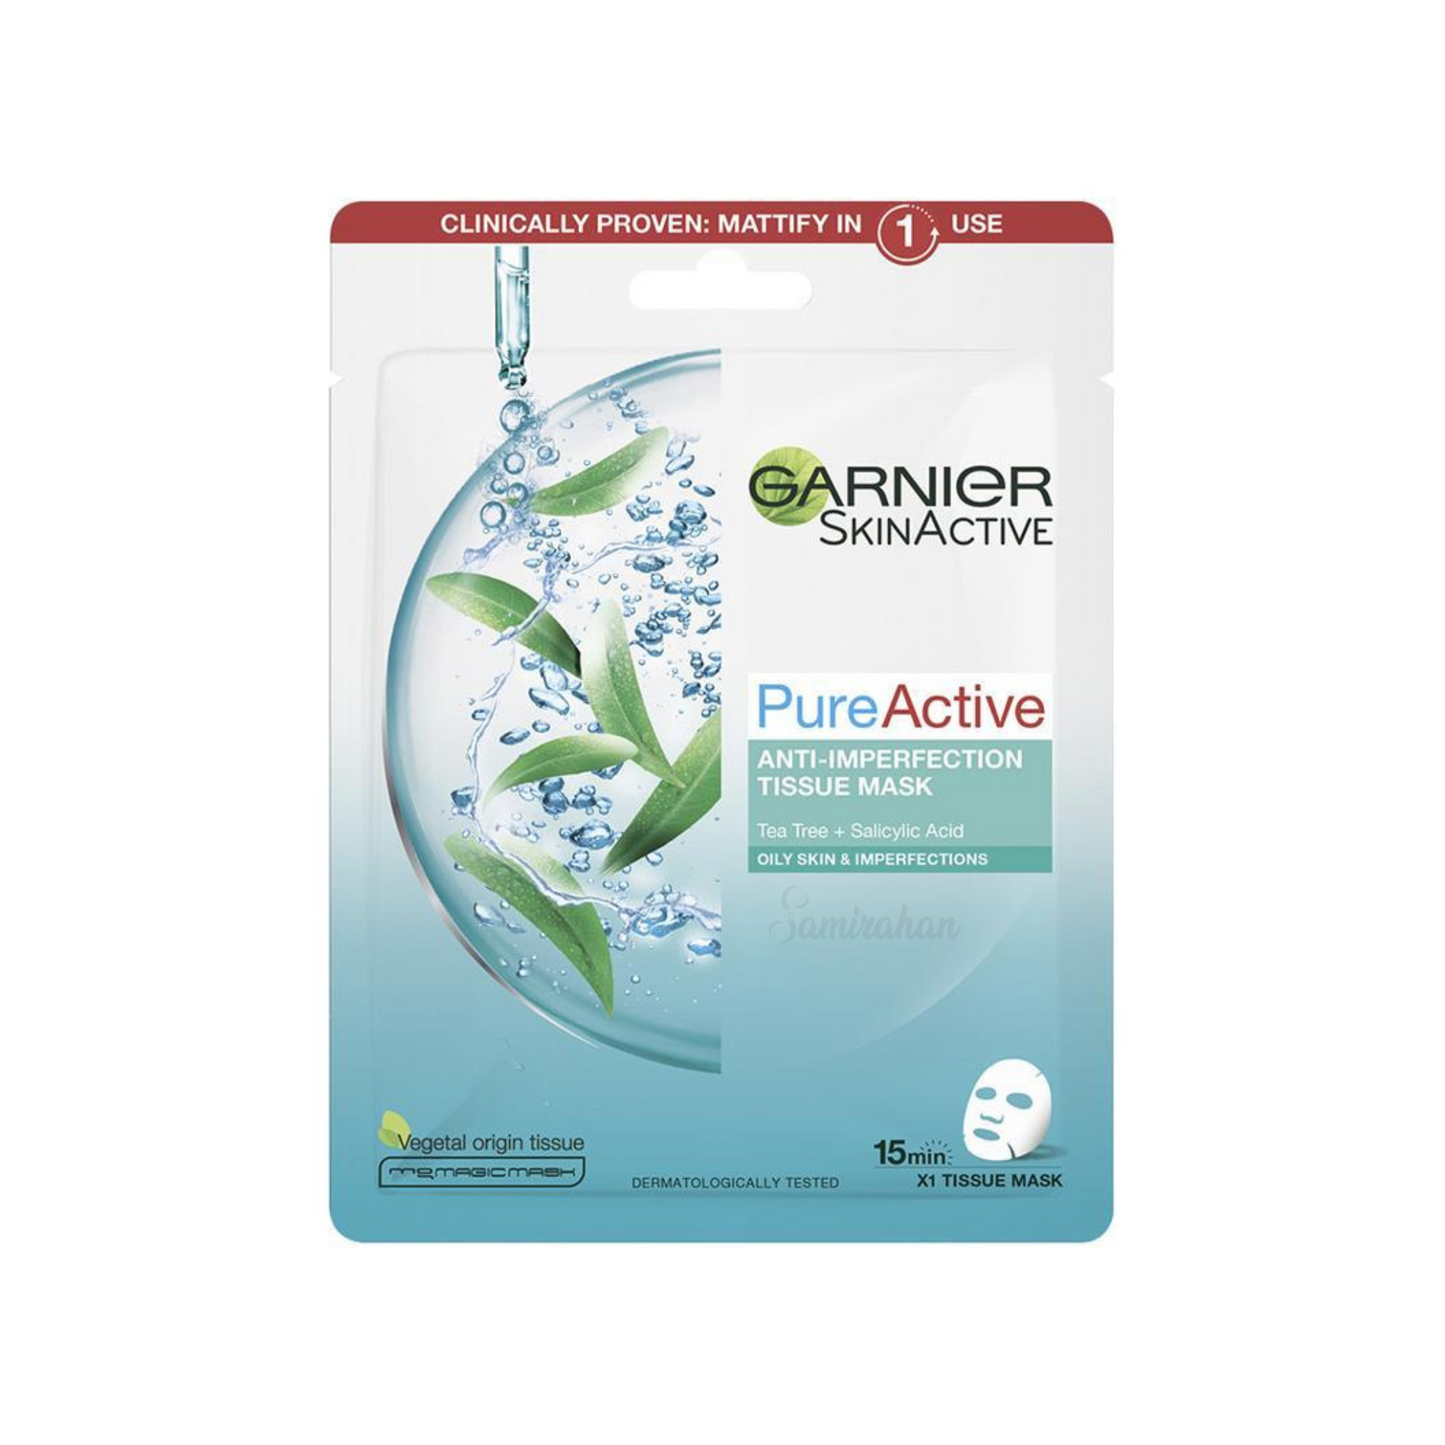 Garnier Pure Active Anti Imperfection Sheet Mask is enriched with Tea Tree & Salicylic Acid to deeply purify mattify the skin, unclog pores reduce imperfections. Best imported foreign UK French British authentic genuine real original premium quality luxury brand beauty cosmetics skincare price in Dhaka Bangladesh.